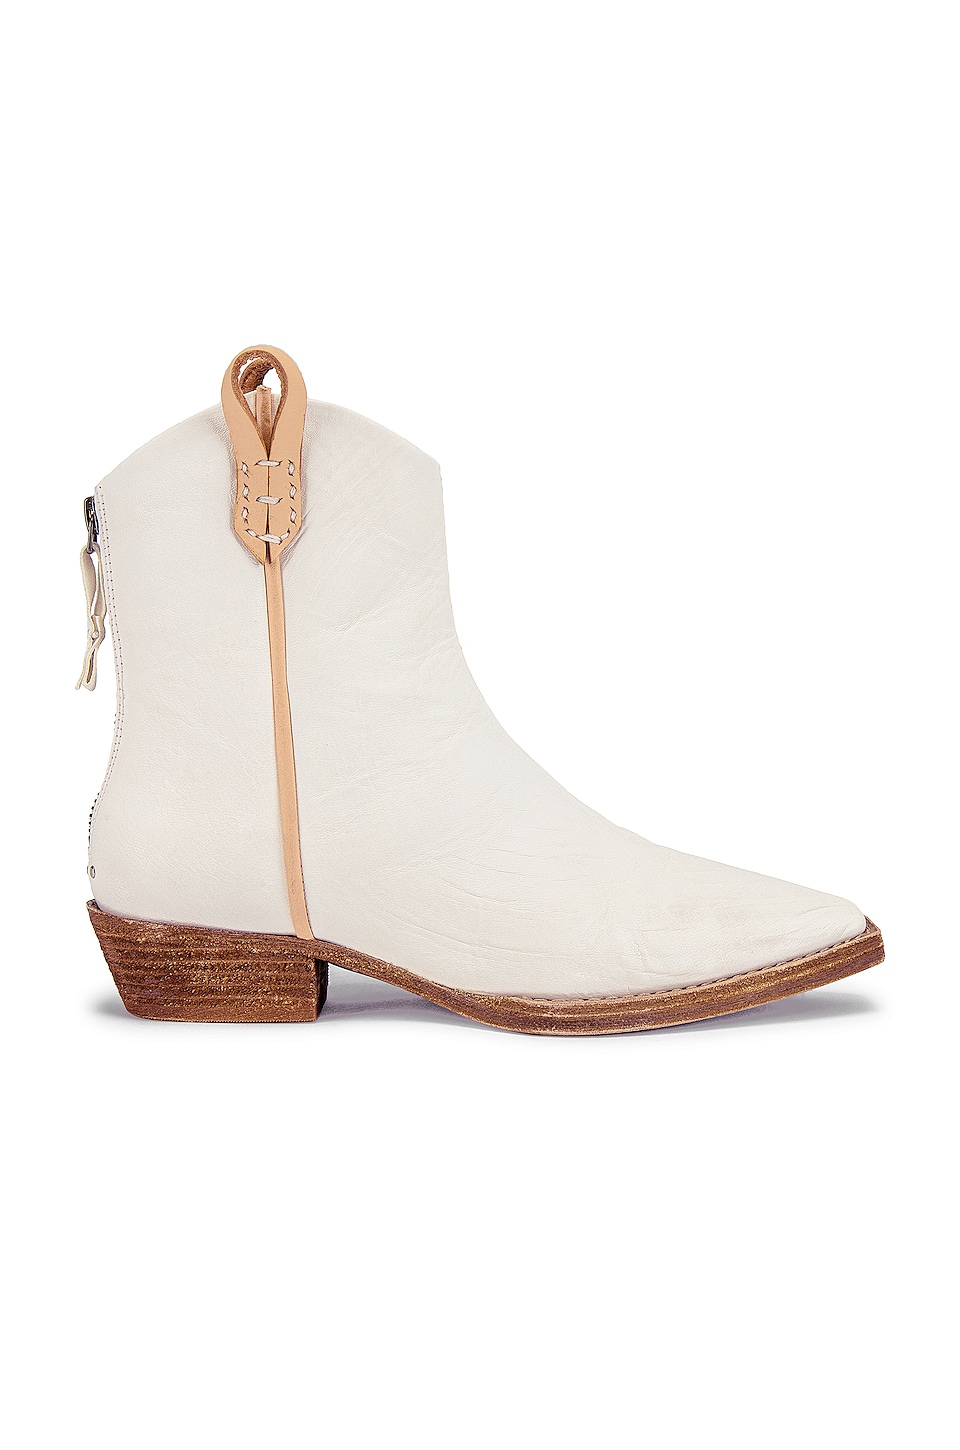 Free People x We The Free Wesley Ankle Boot in Bone